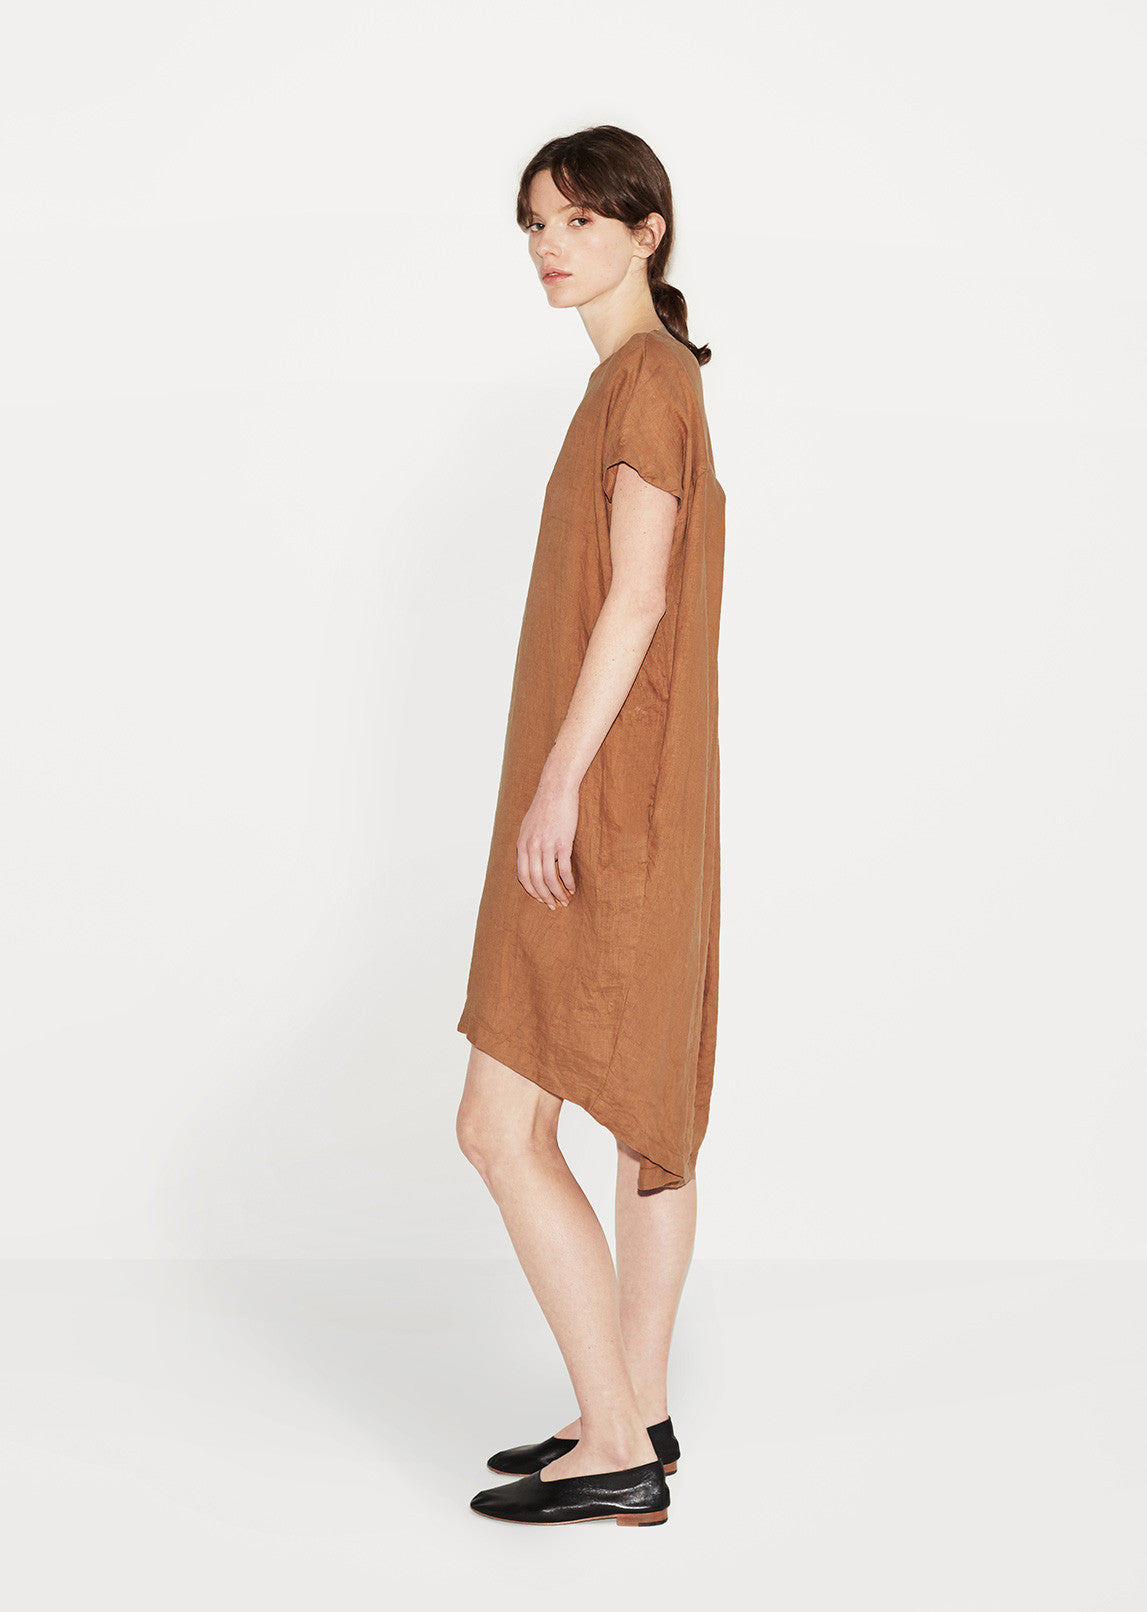 Pleated Cocoon Dress by Black Crane 